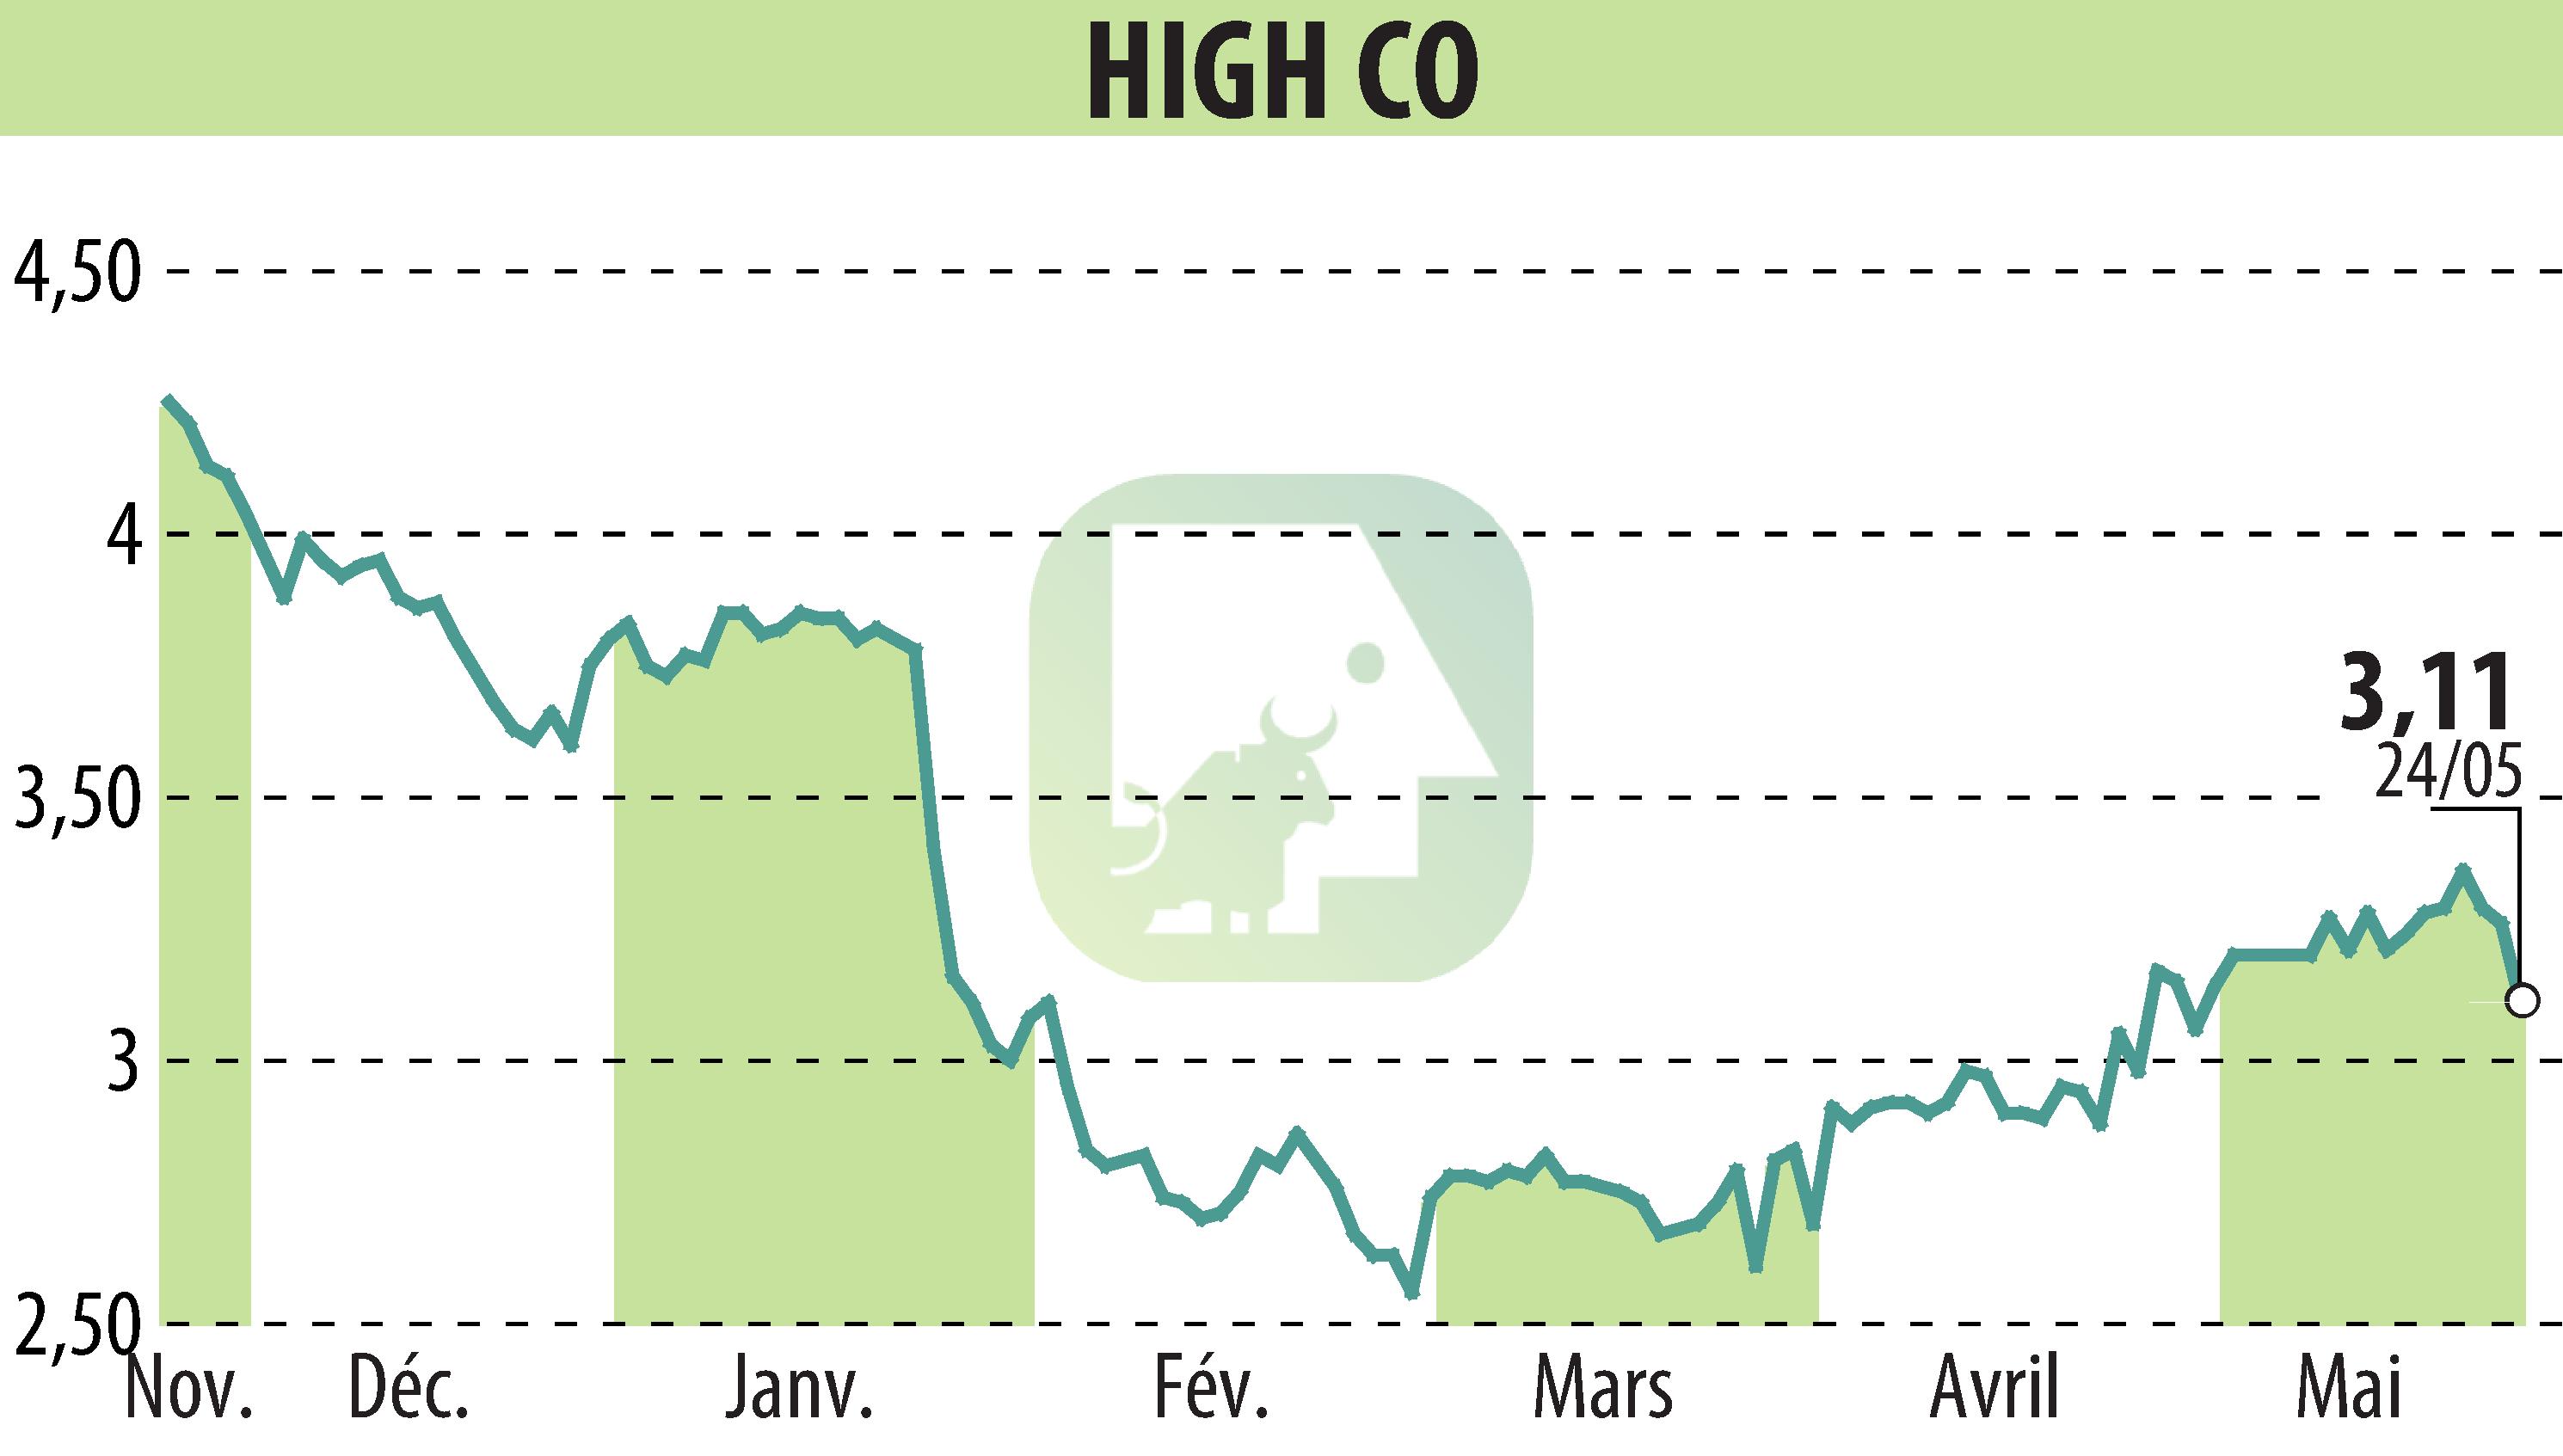 Stock price chart of High Co (EPA:HCO) showing fluctuations.